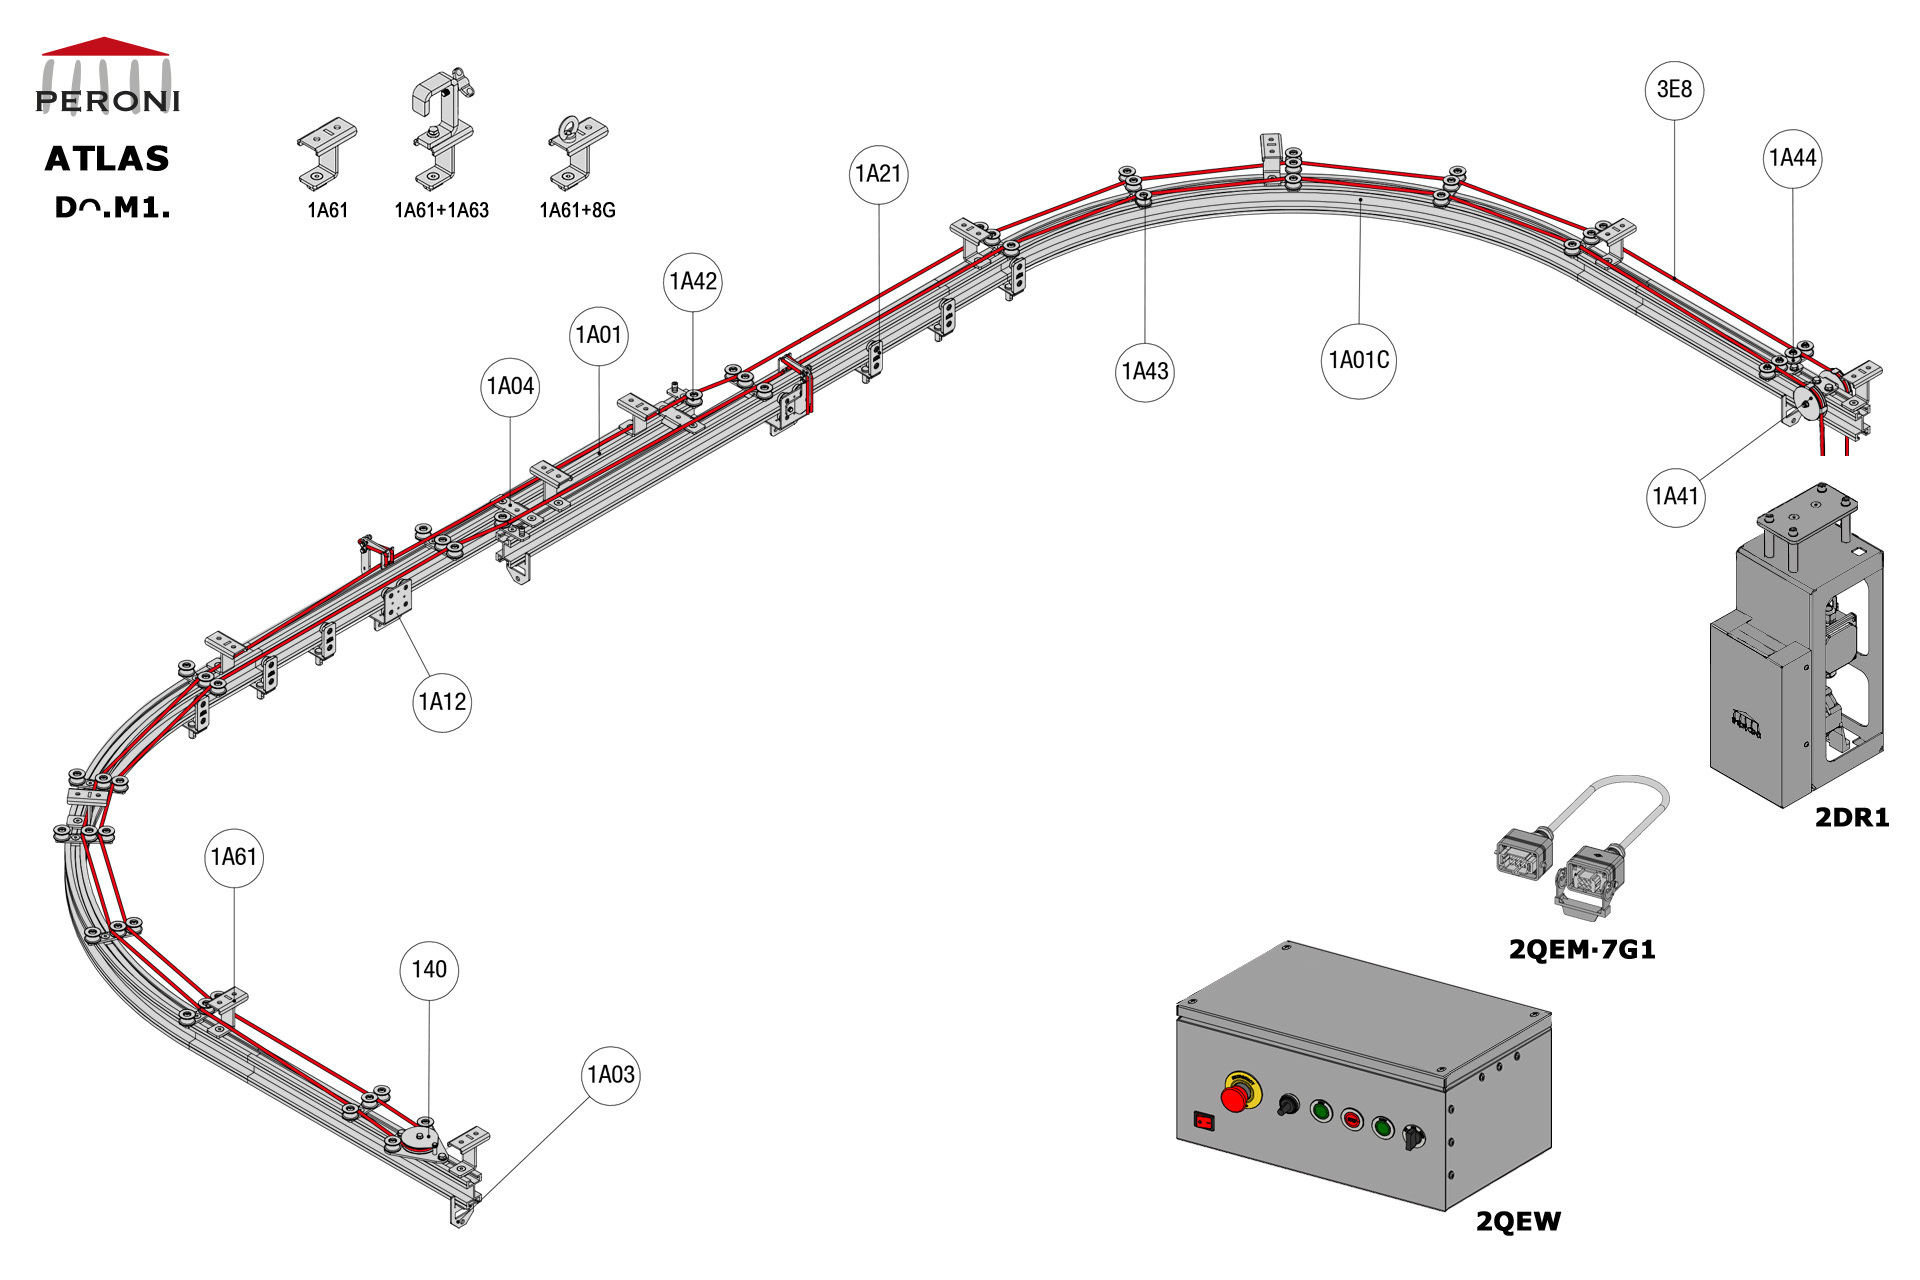 Dᴖ.M1. configuration track Dᴖ. Straight double rail central openingM1. Motorizedcentral overlap exceeding 50 cmComponents1A01 - Straight rail1A01C - Curved rail1A02 - Connection set1A03 - End stop1A04 - Overlap bridge1A12 - Top cord master carrier1A20 - 2 Wheel runnerMotion control1A40 - Return pulley1A41 - Head double pulley1A42 - Top cord guide for overlap1A43 - Top cord guide1A44 - Top cord aligner1A70 - Top cord limit switch with pulley1A71 - Top cord limit switch arm1A72 - Cord guide for limit switch2DR1-RDS2QEM-7G1-152QEW - W panel board 3E - Poly rope  8 mm